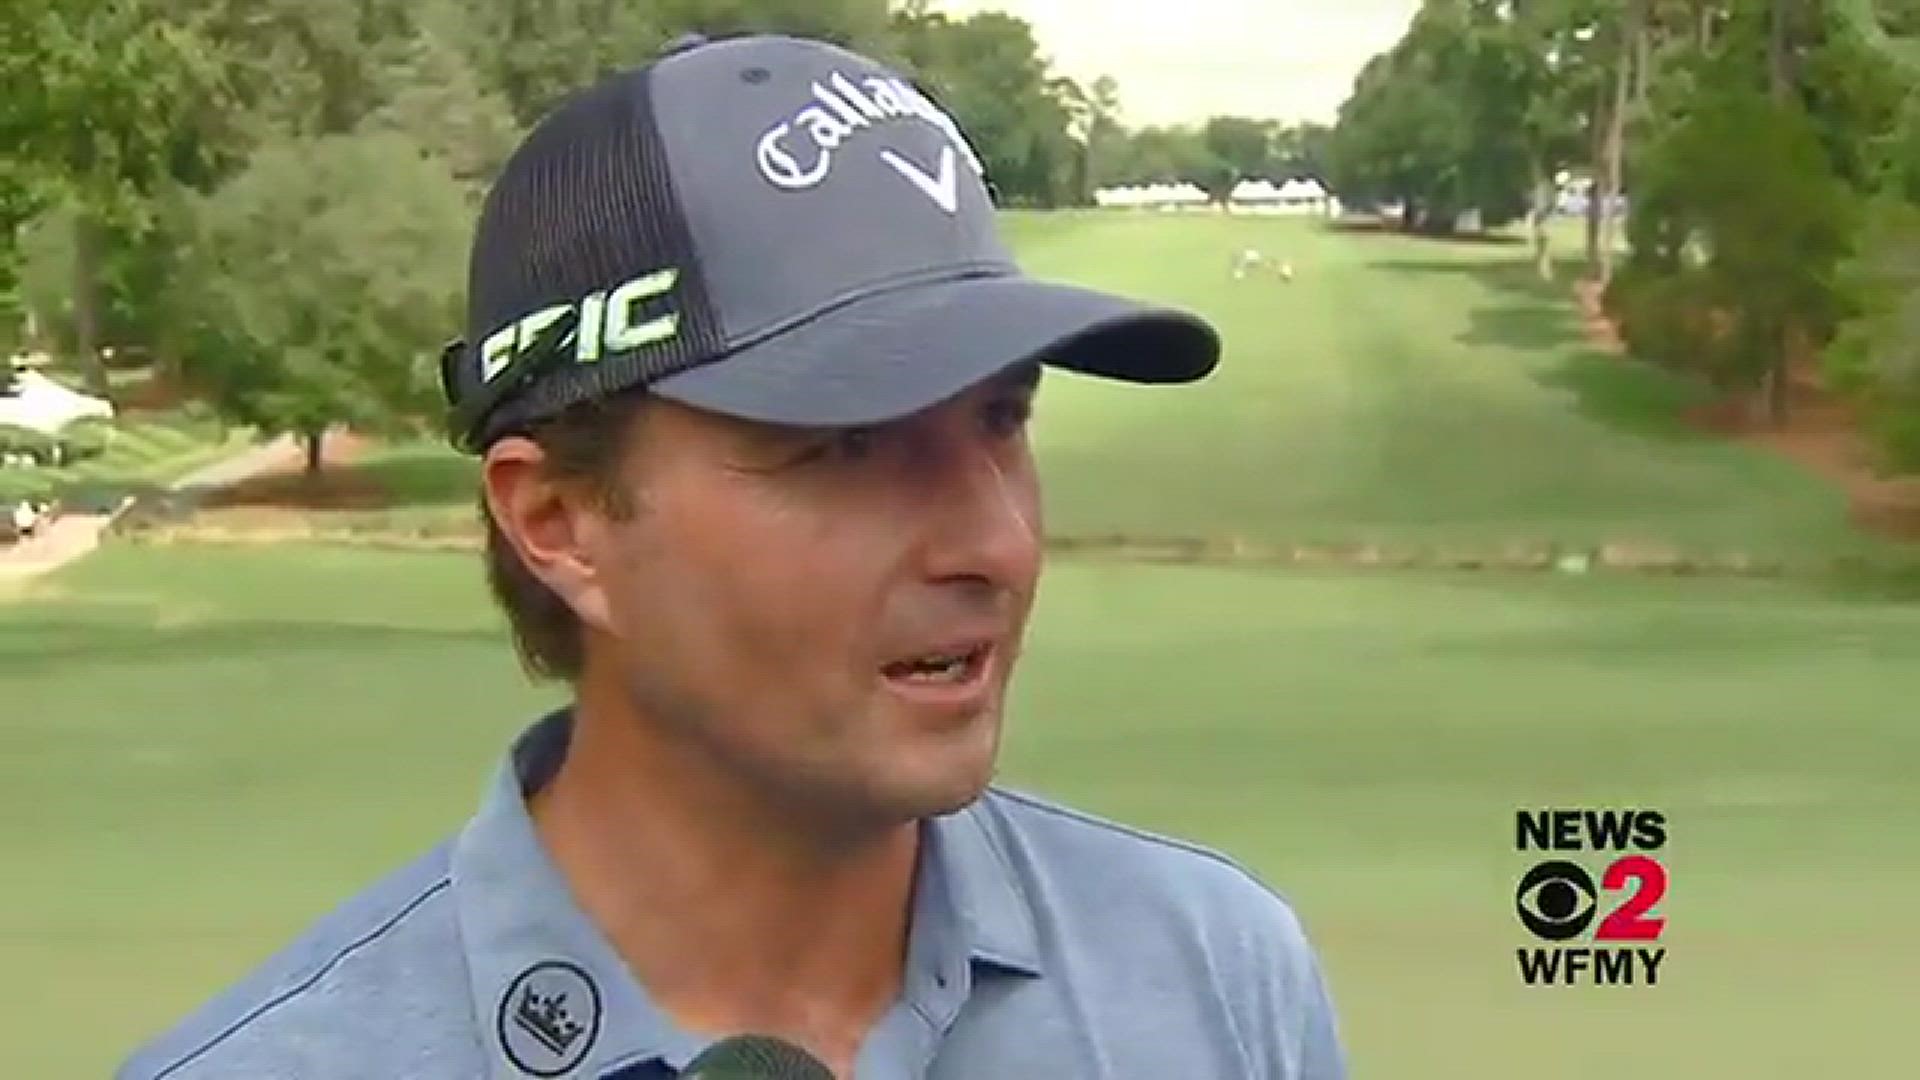 Kevin Kisner just won the 2021 Wyndham Championship Sunday. He shared his thoughts with WFMY News 2.